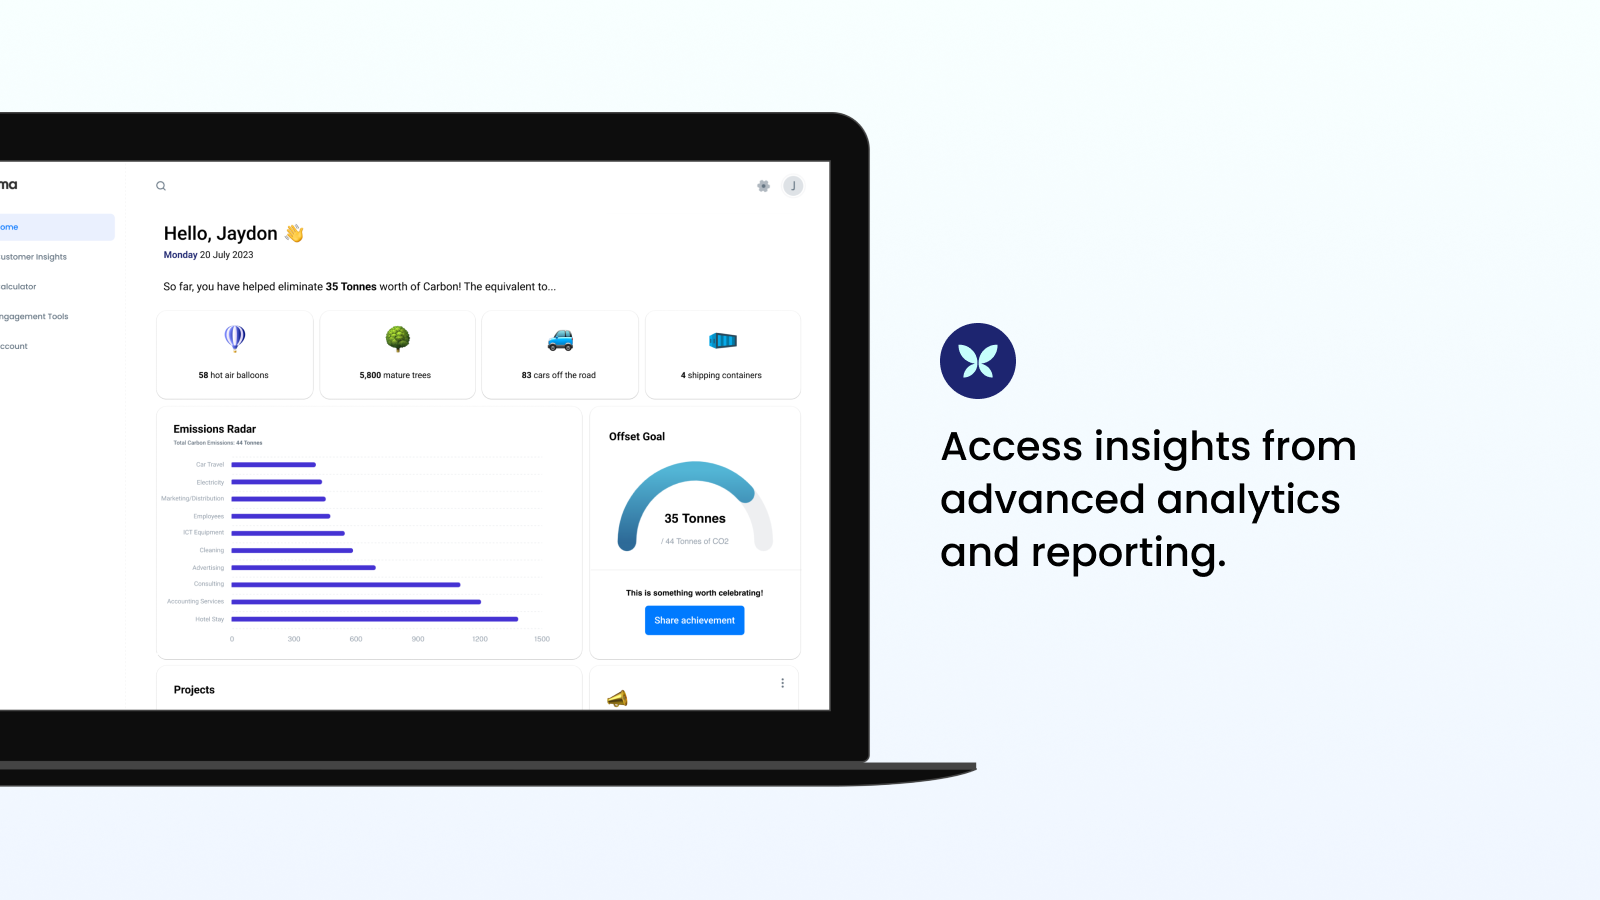 Advanced data insights and reporting